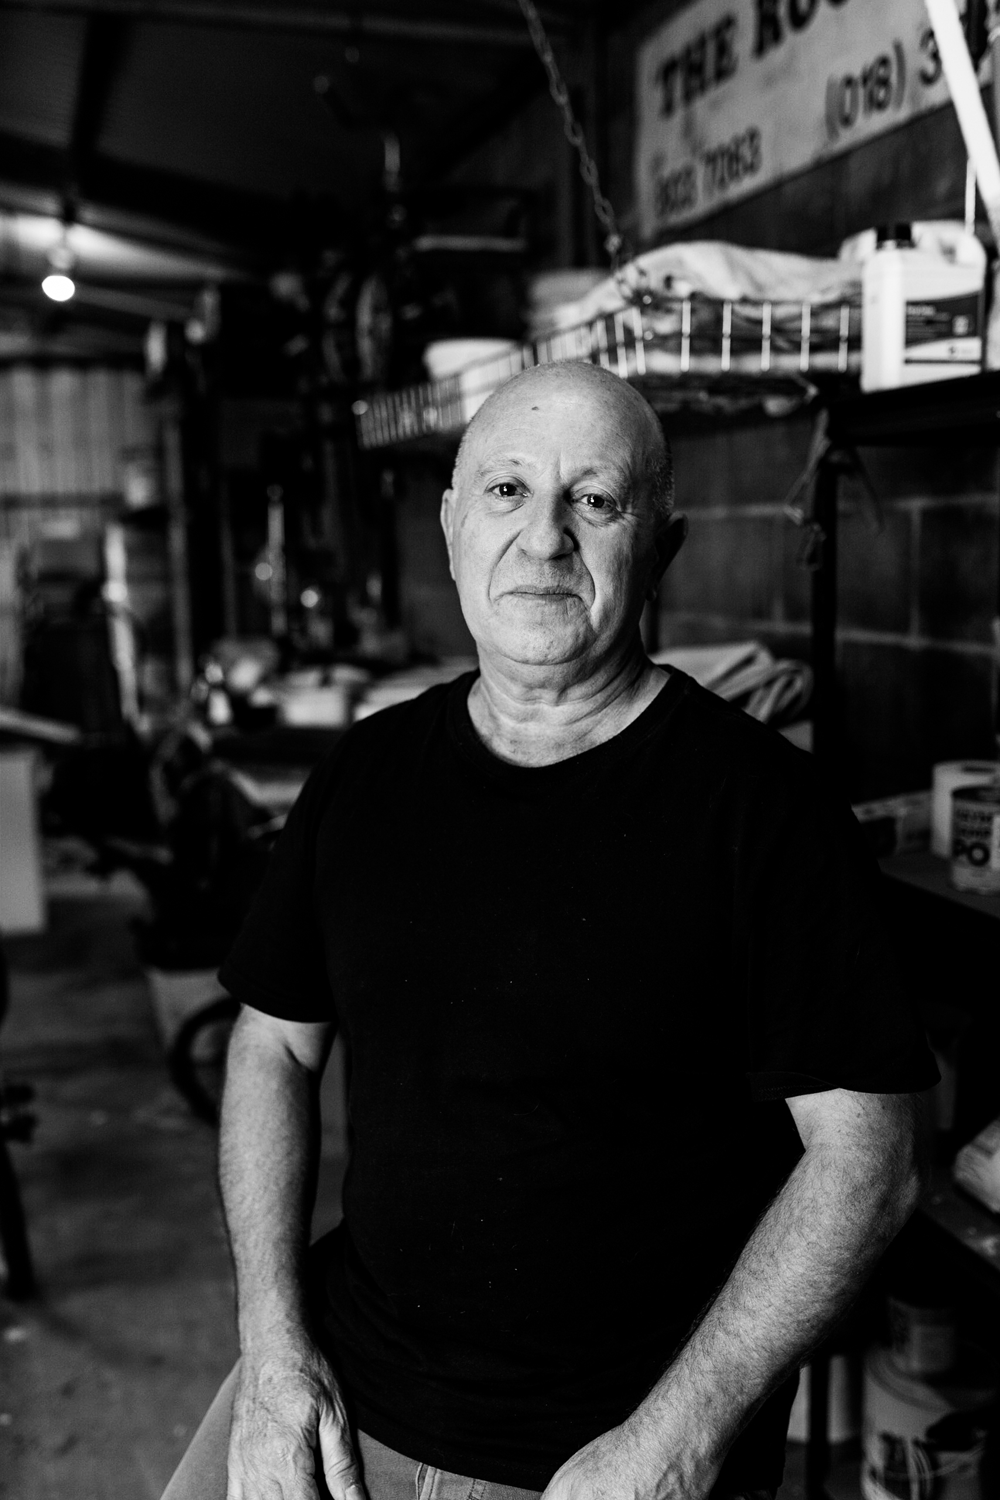 Black and white photograph of a portrait of an man sitting in a garage.